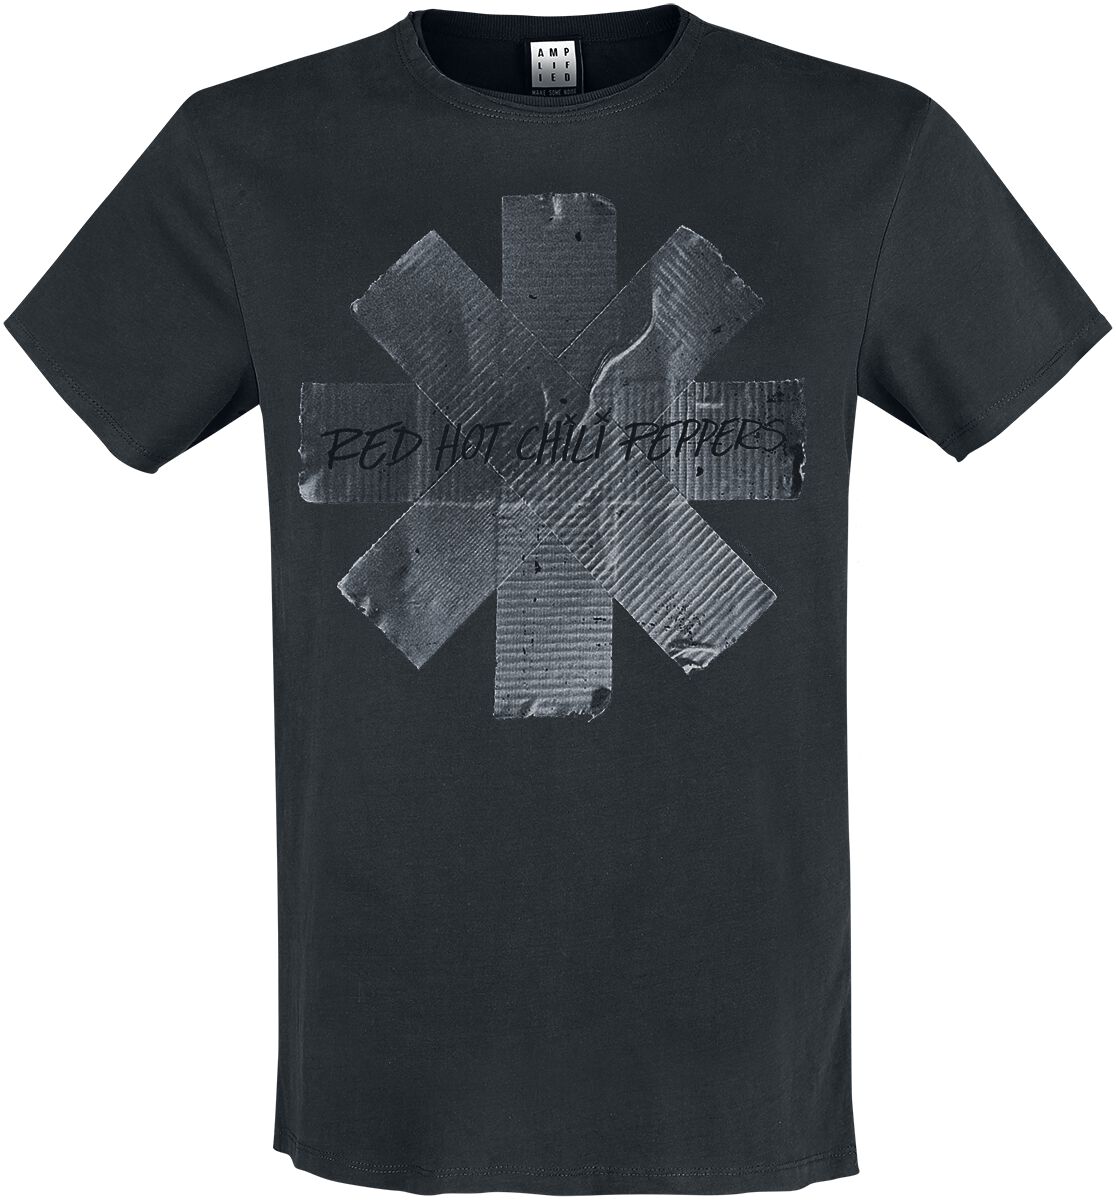 Image of Red Hot Chili Peppers Amplified Collection - Duct Tape T-Shirt schwarz